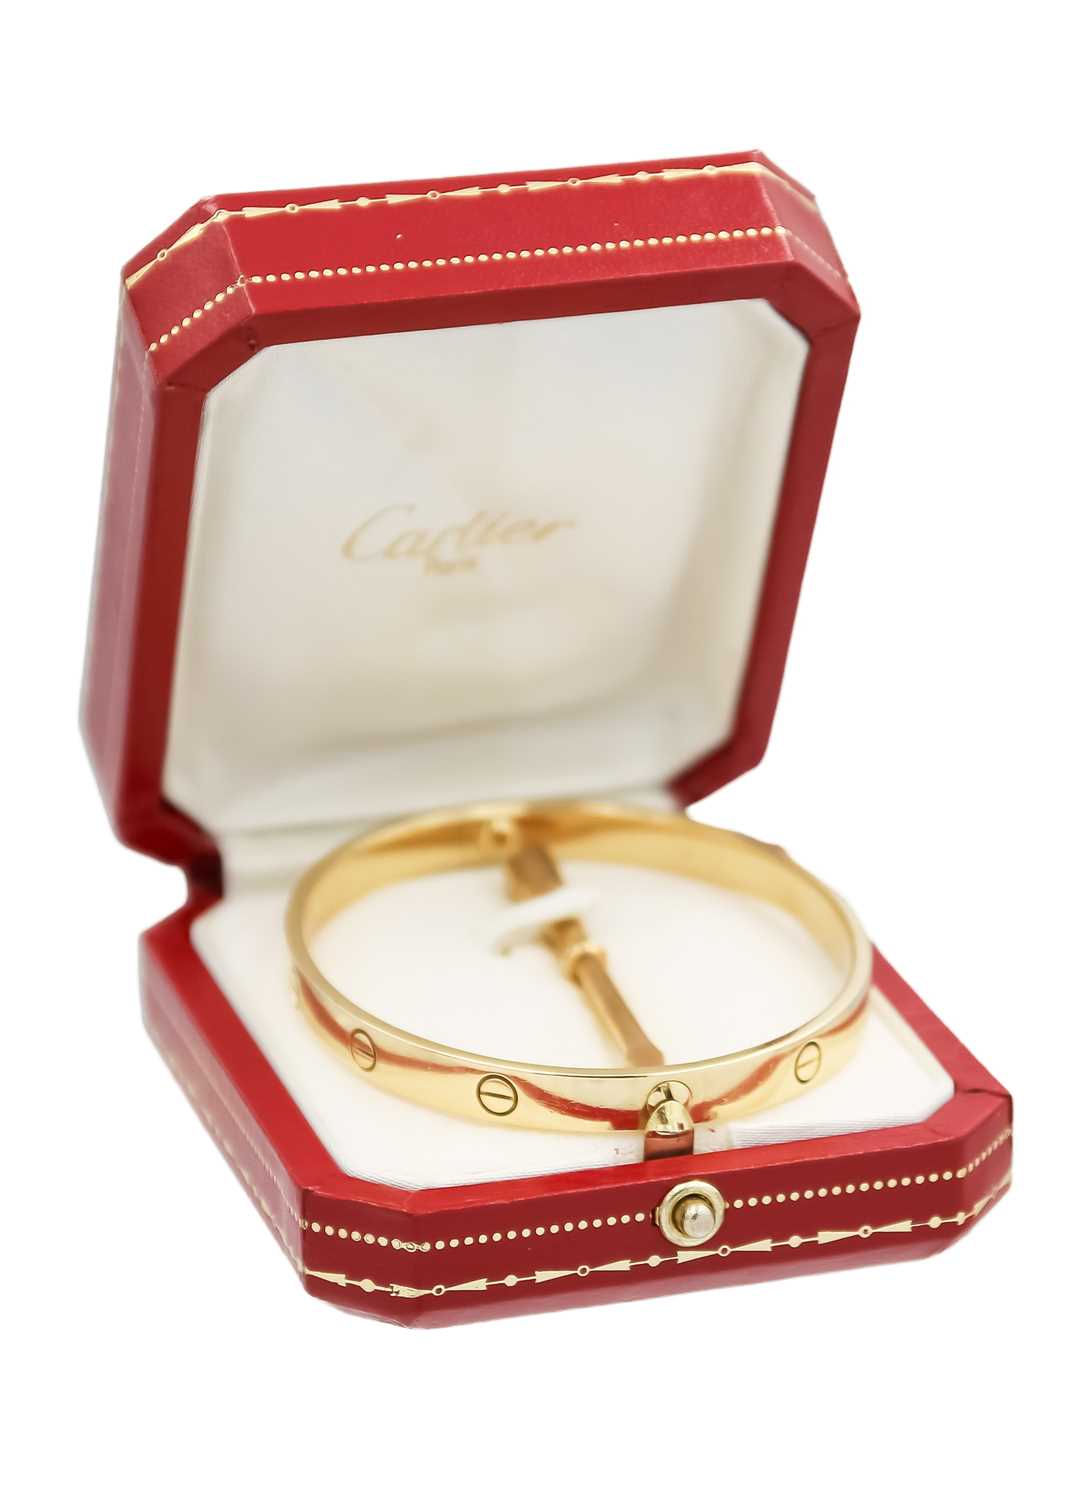 CARTIER - An 18ct love bangle with a screwdriver and original box and bag. - Image 3 of 6